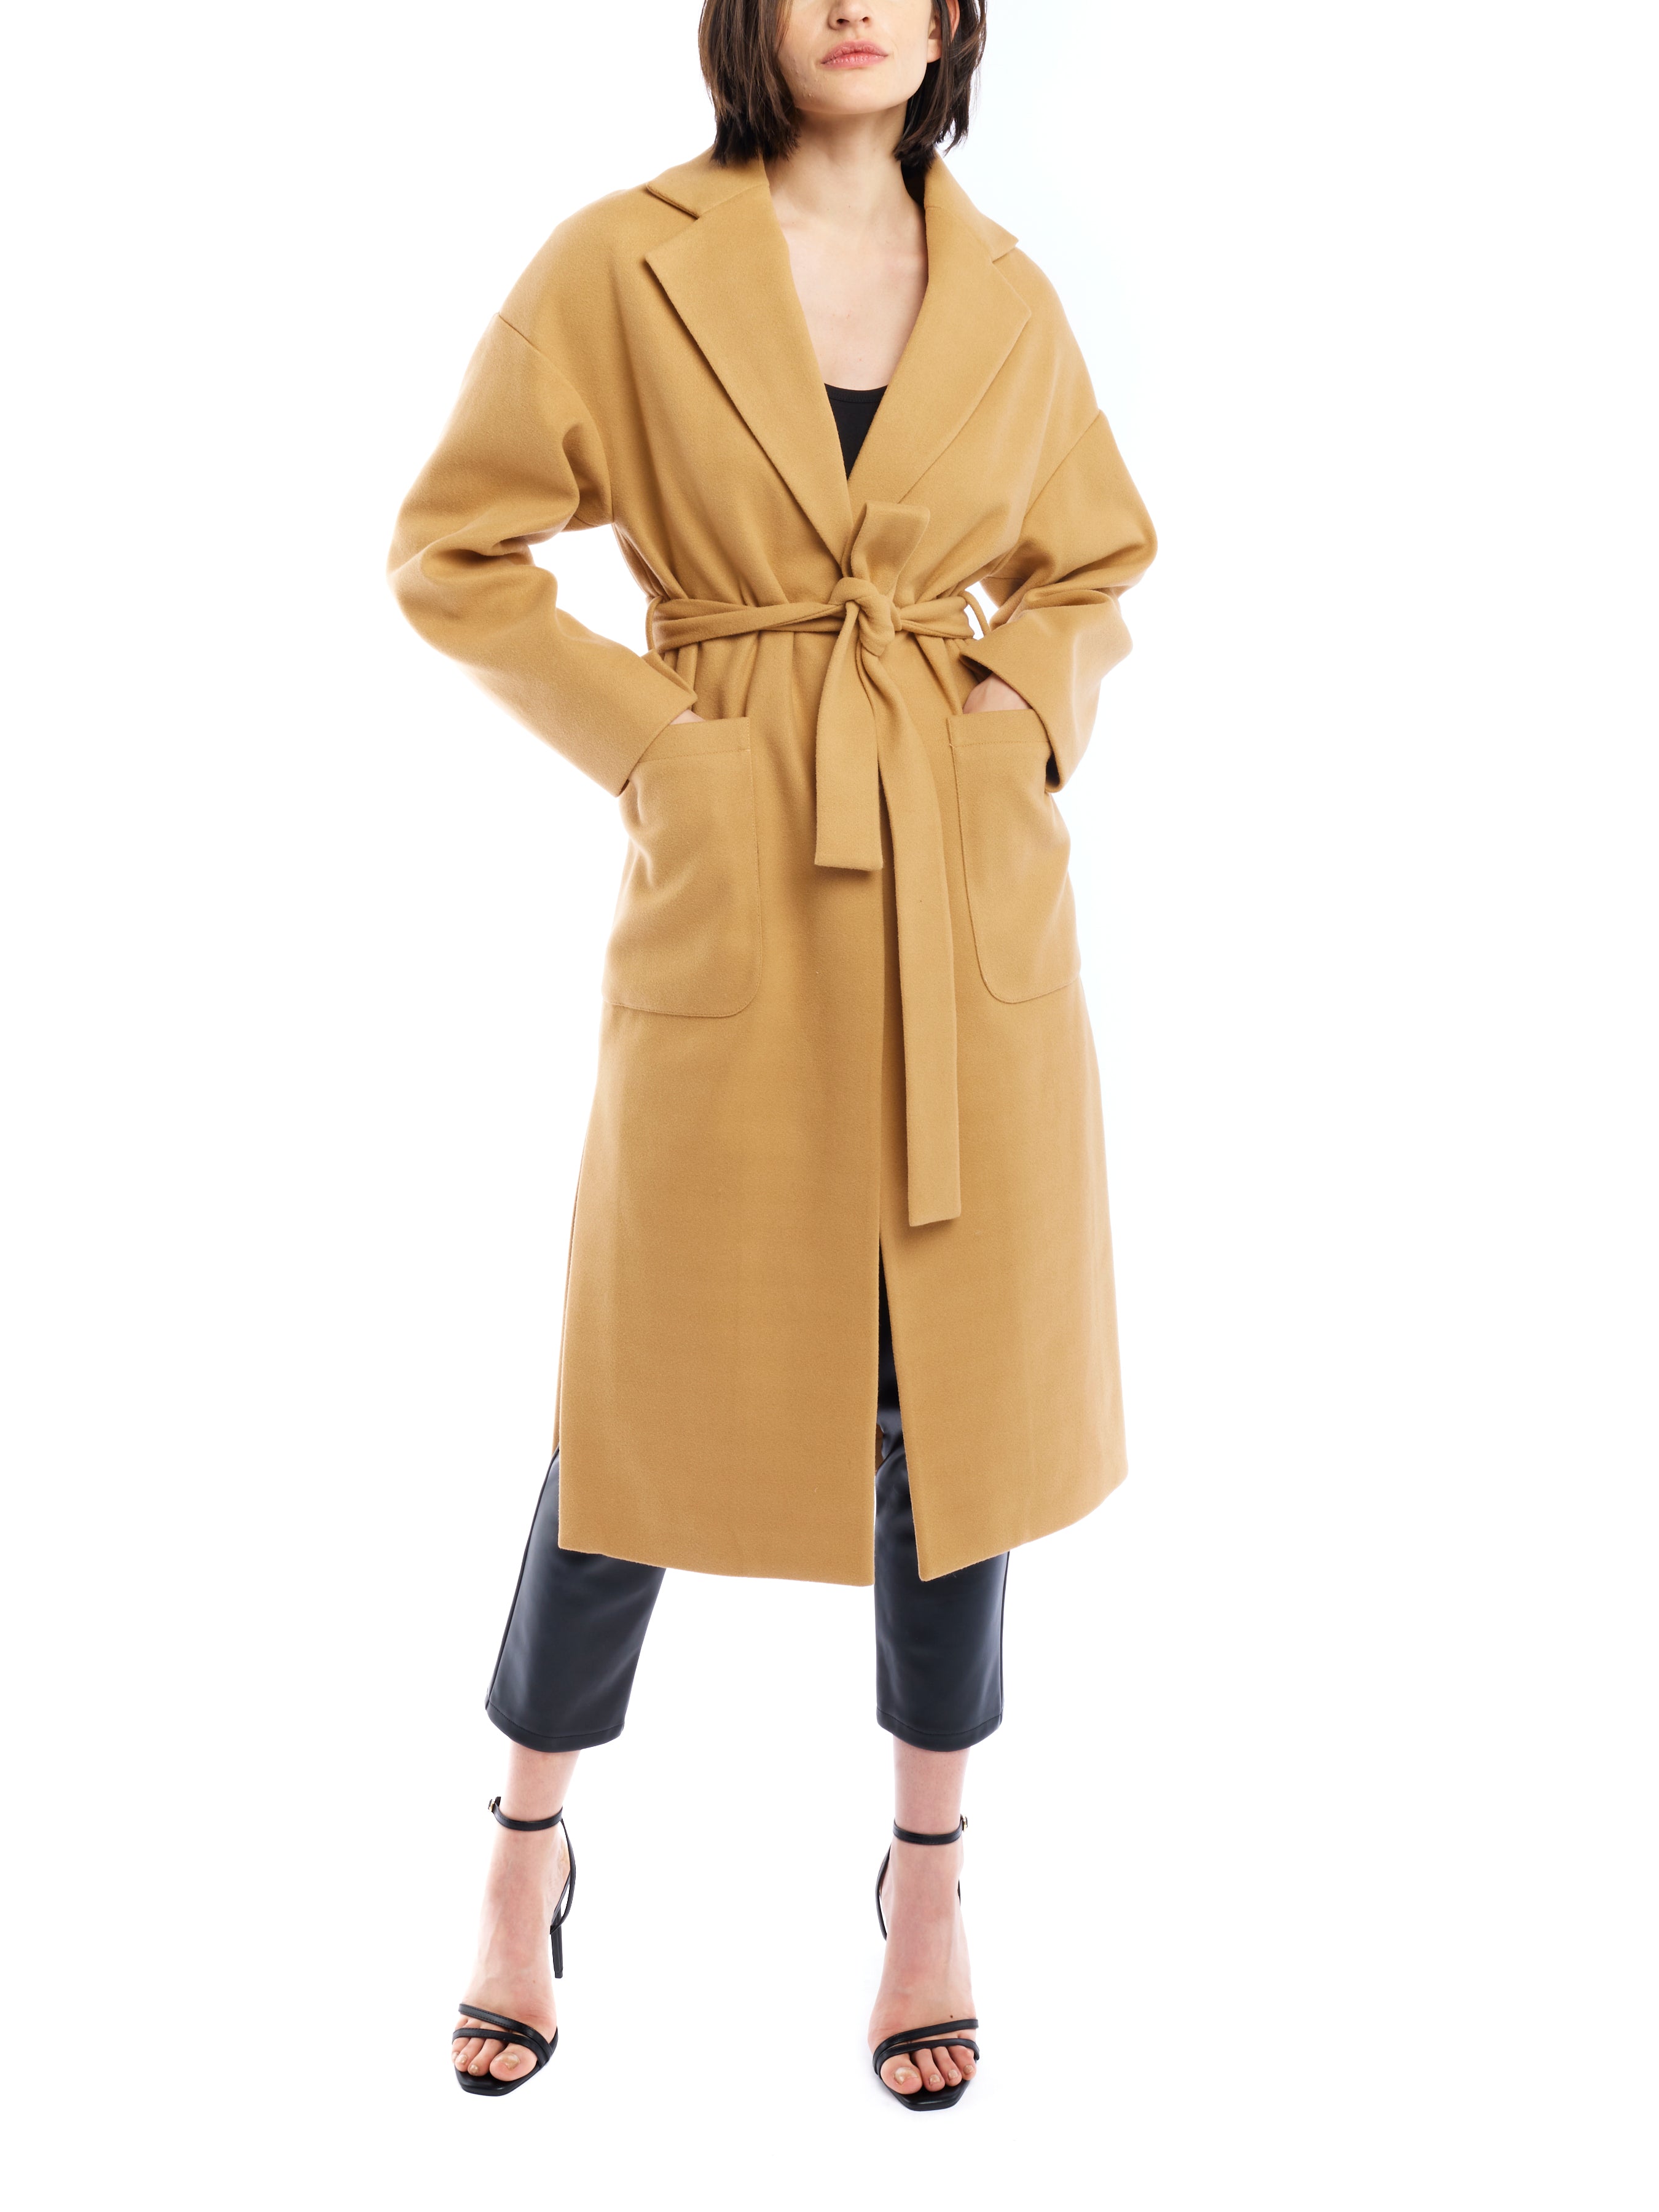 tie front midi length jacket is made with soft faux wool, detachable tie belt and deep front pockets in camel